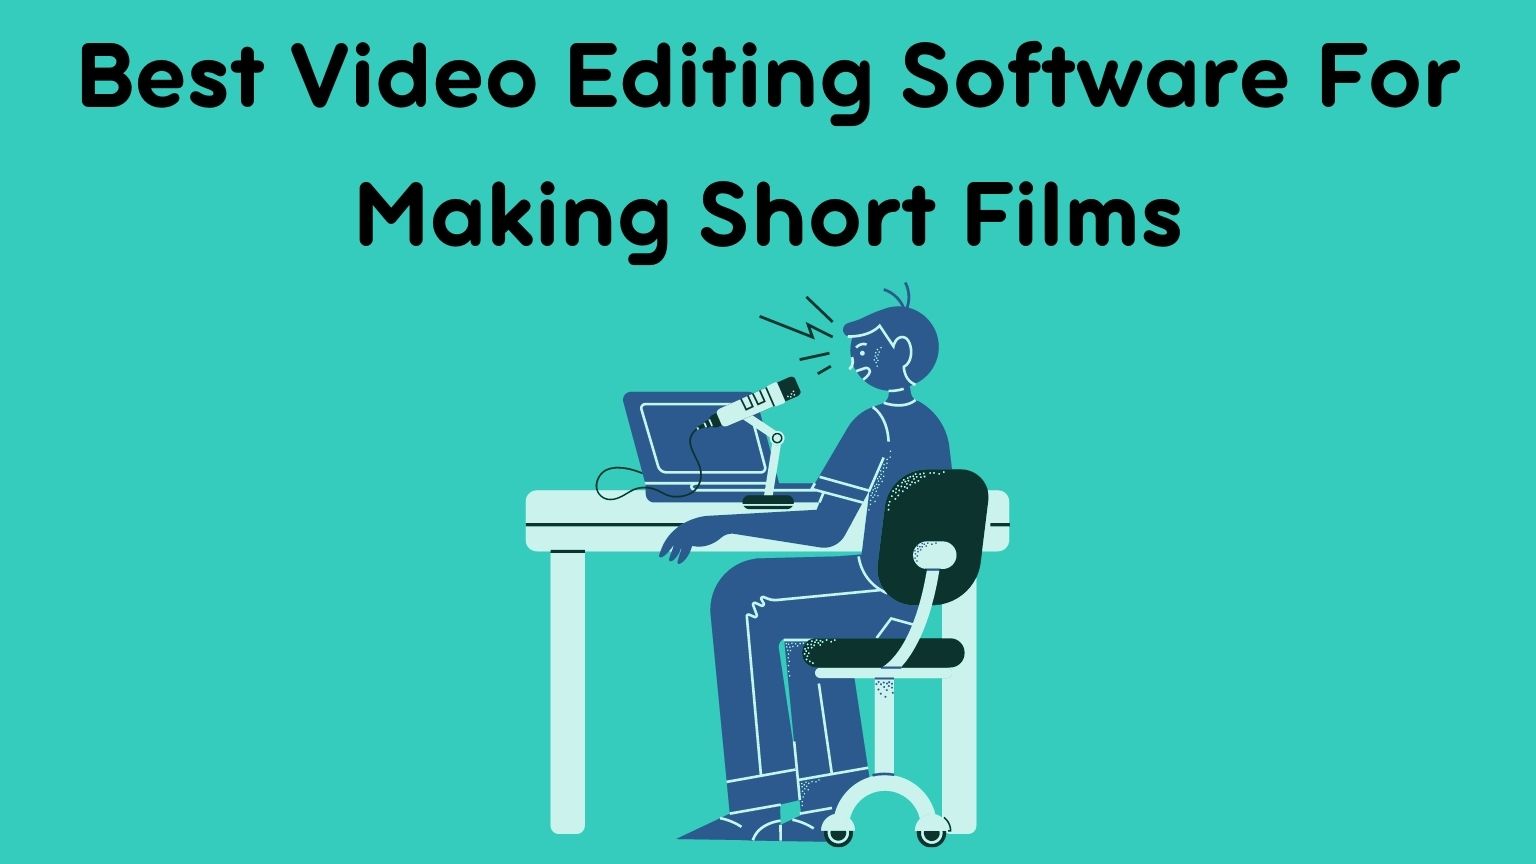 Best Video Editing Software For Making Short Films